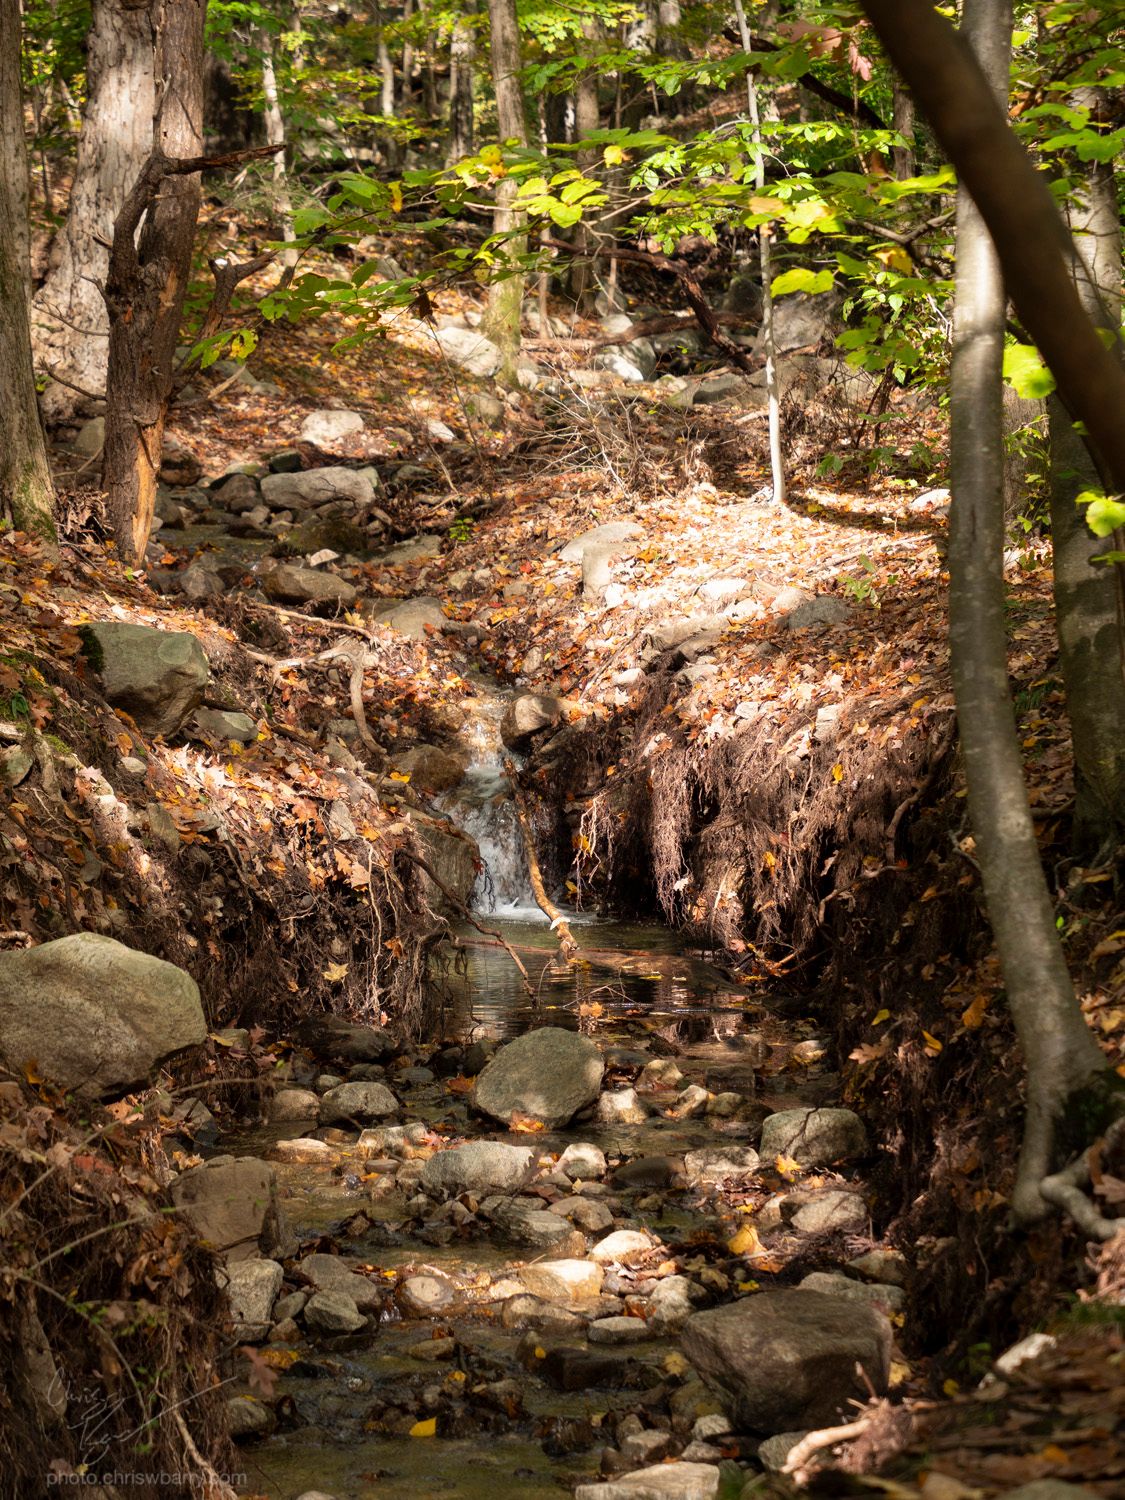 A brightly lit stream, with a small waterfall just out of focus. It is full of rocks, with a high lip around it